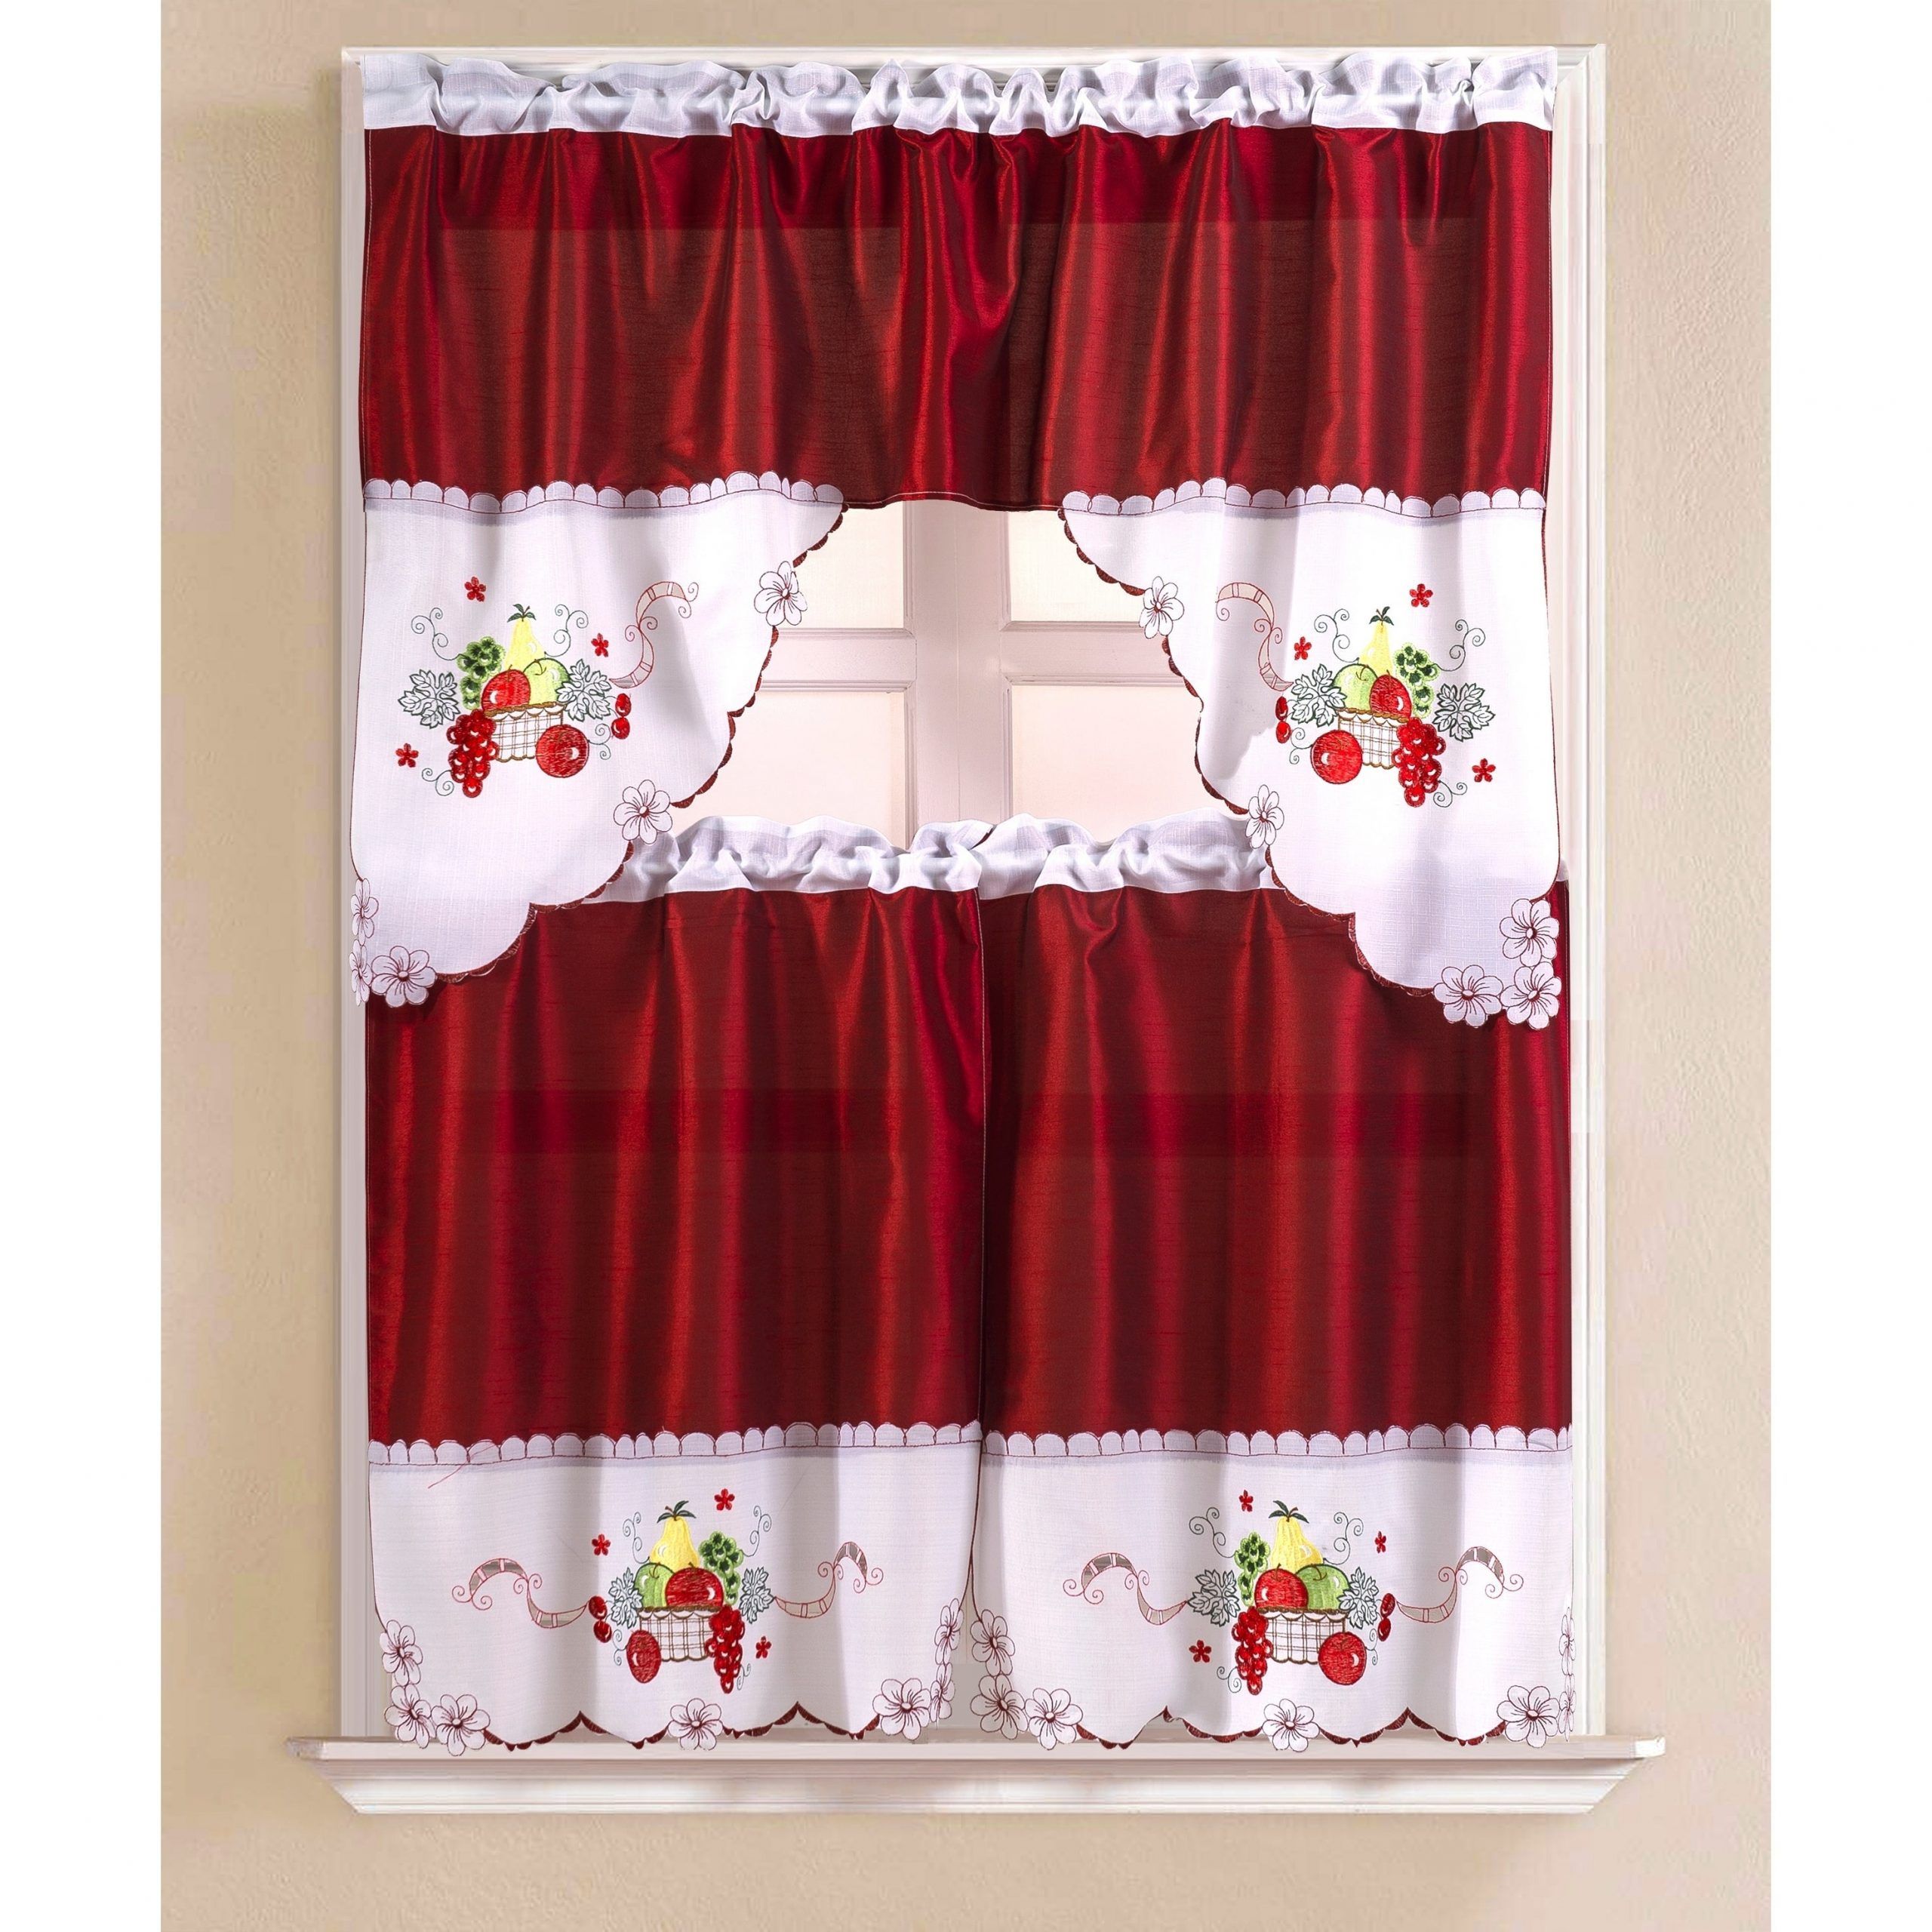 Porch & Den Eastview Faux Silk 3 Piece Kitchen Curtain Set Intended For Top Of The Morning Printed Tailored Cottage Curtain Tier Sets (View 12 of 20)